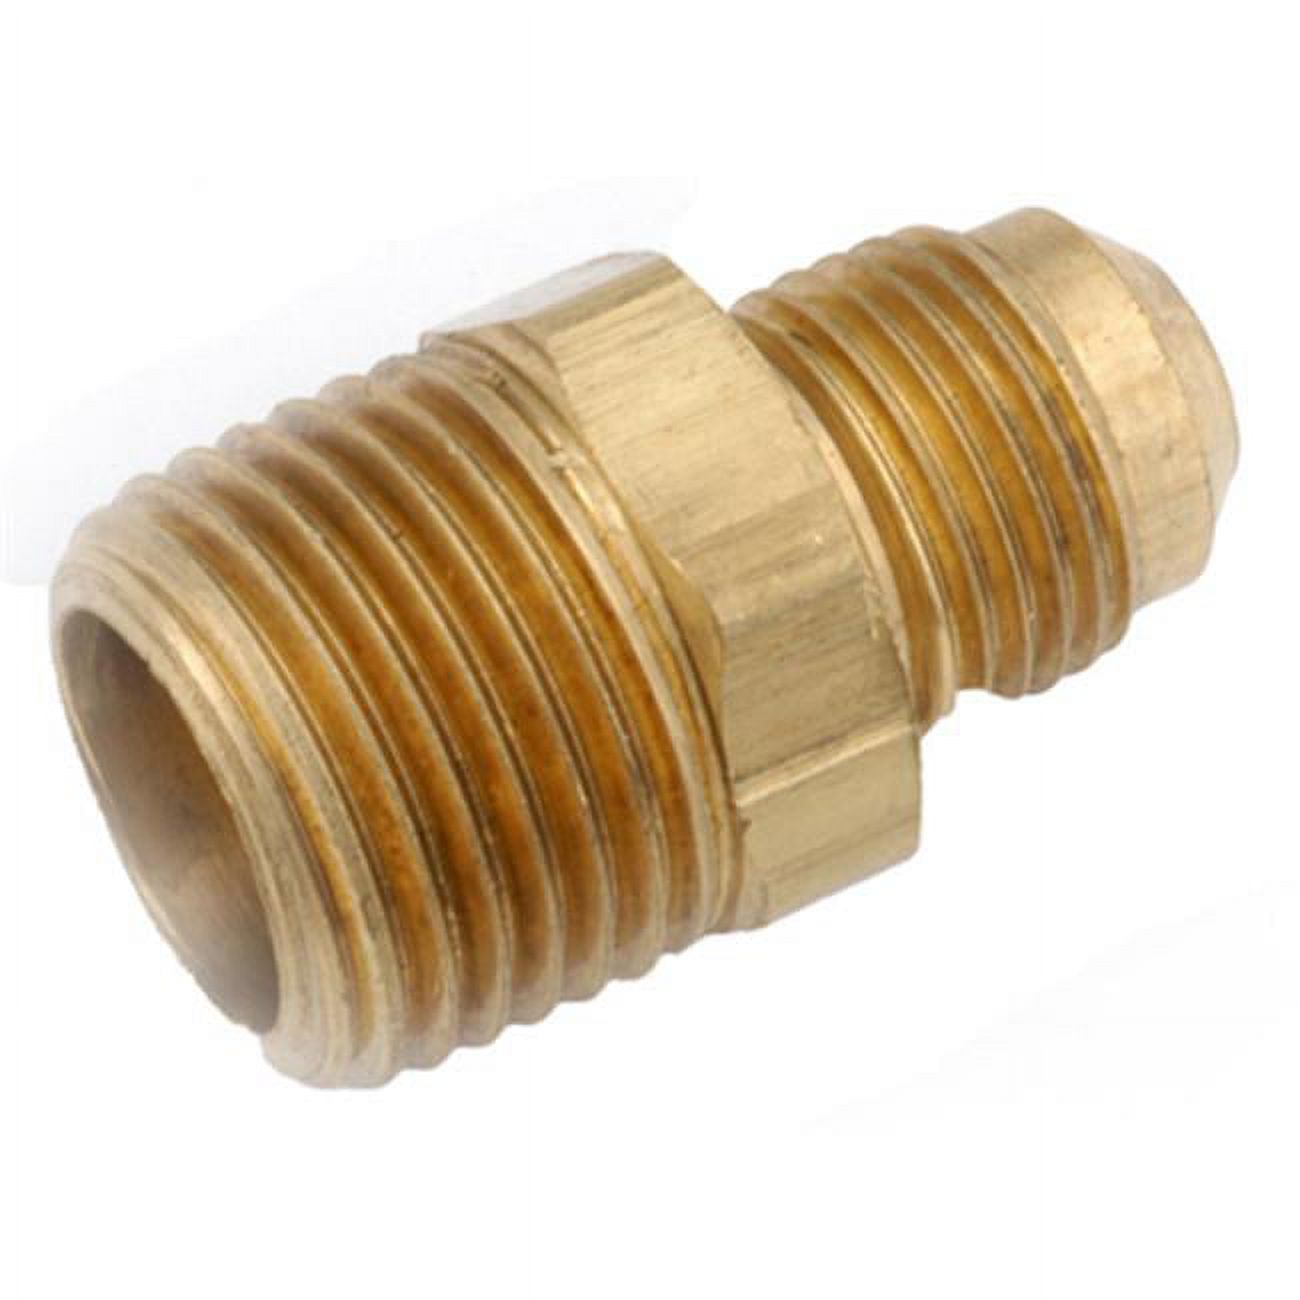 Anderson Metals 714048-0404 .25 in. Flare x .25 in. Male Iron Pipe Thread Brass Connector - image 1 of 2